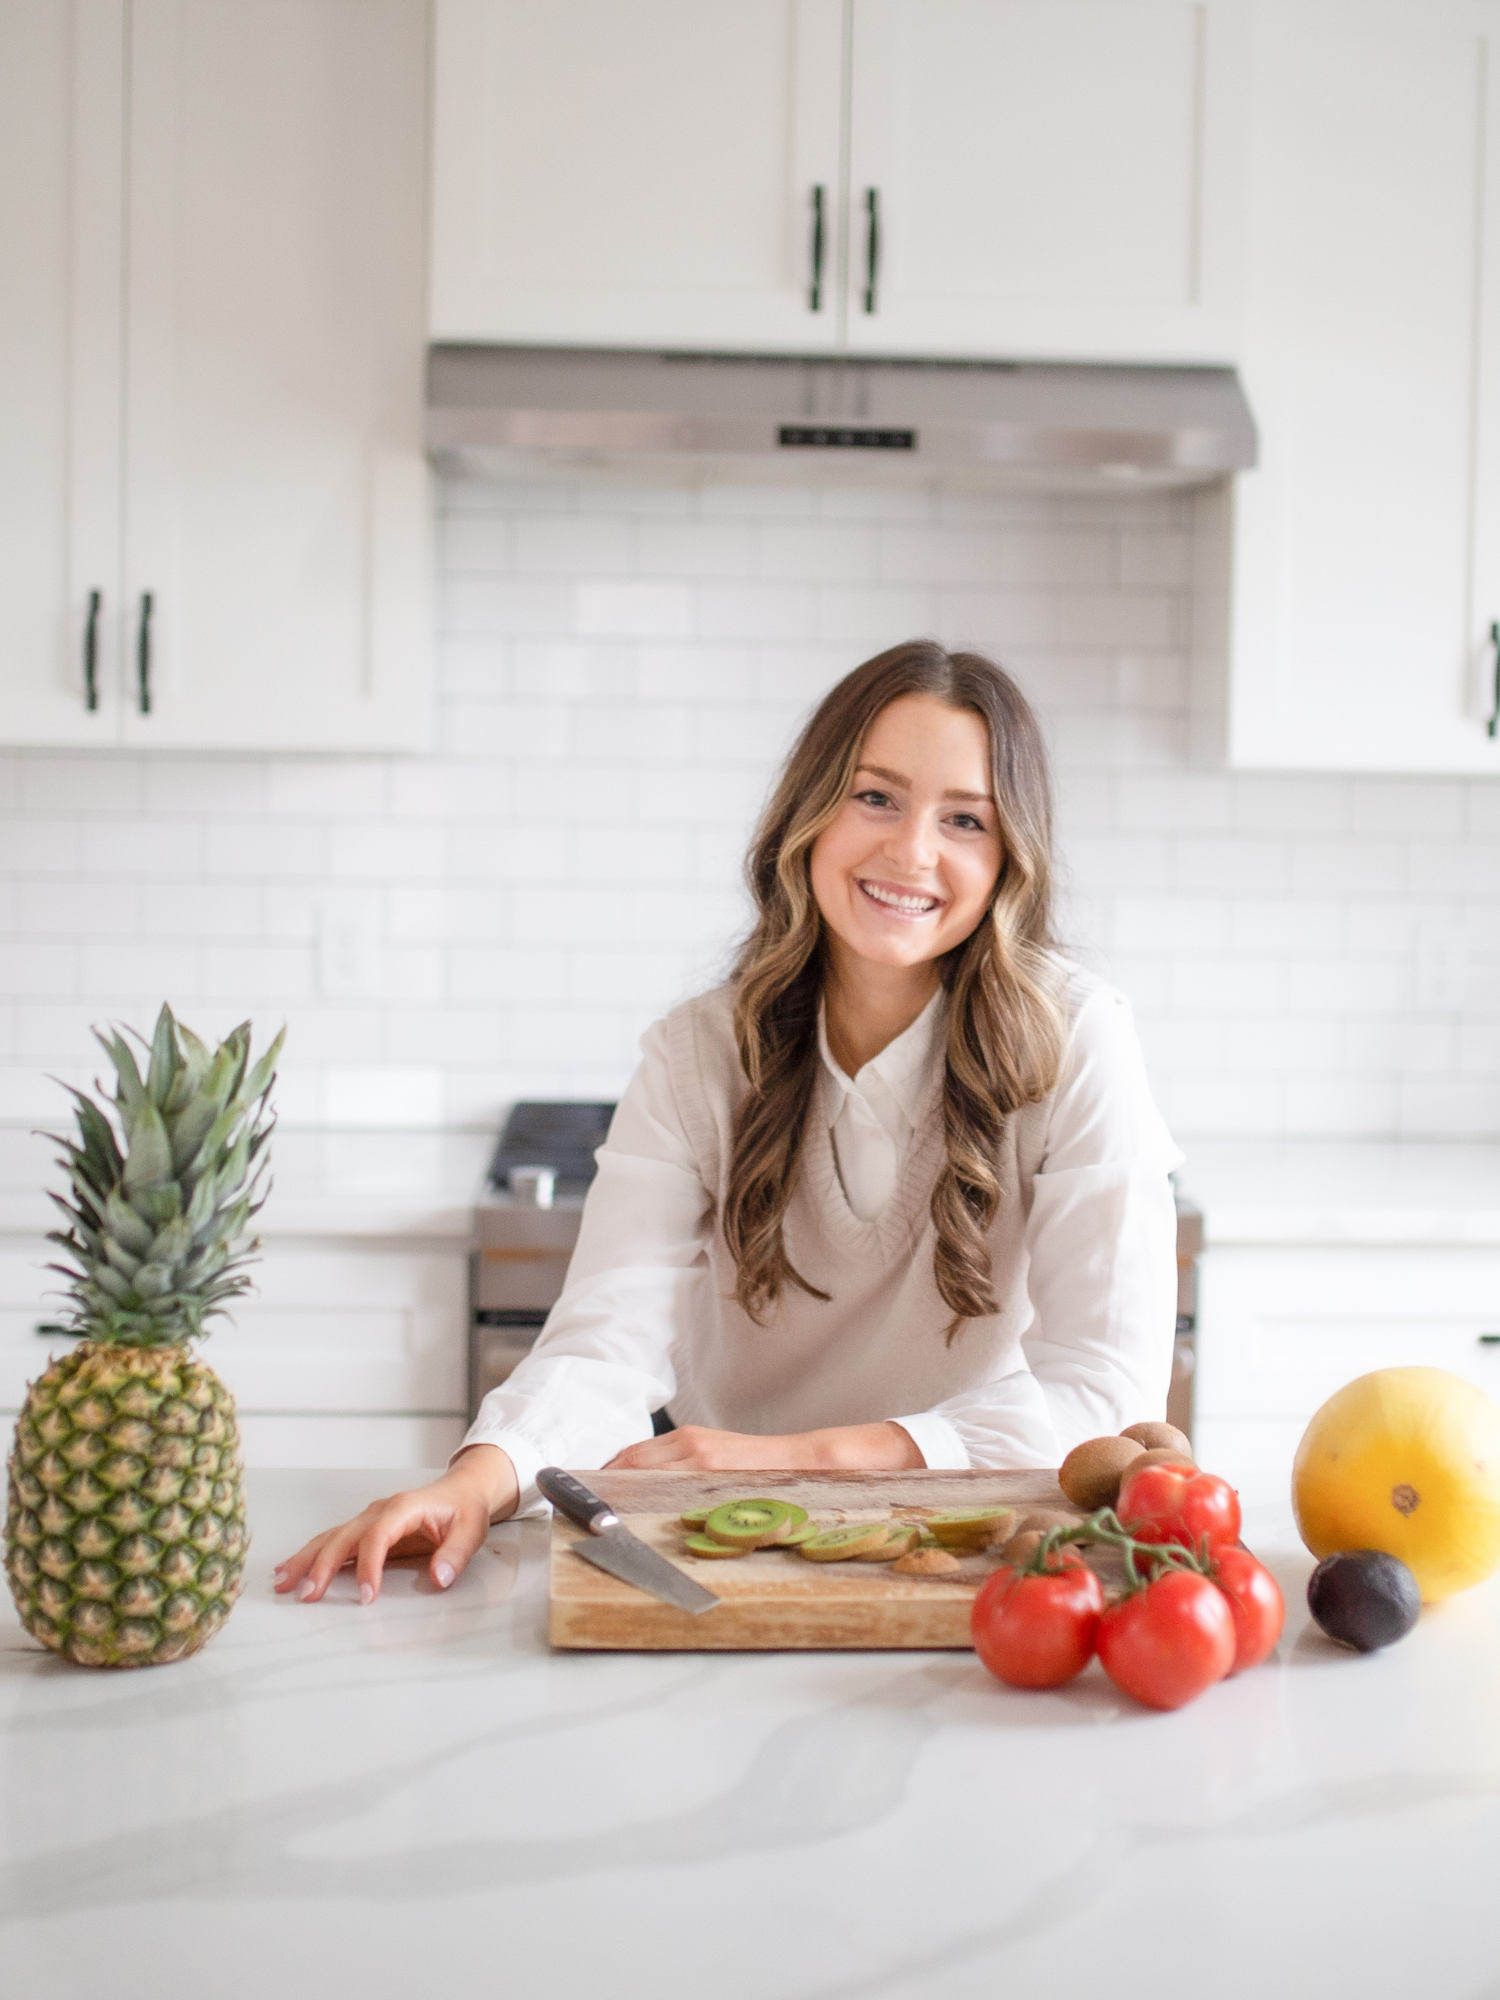 a woman dietician sitting at a kitchen counter with a cutting board and a pineapple, tomatoes, kiwis and a spaghetti squash